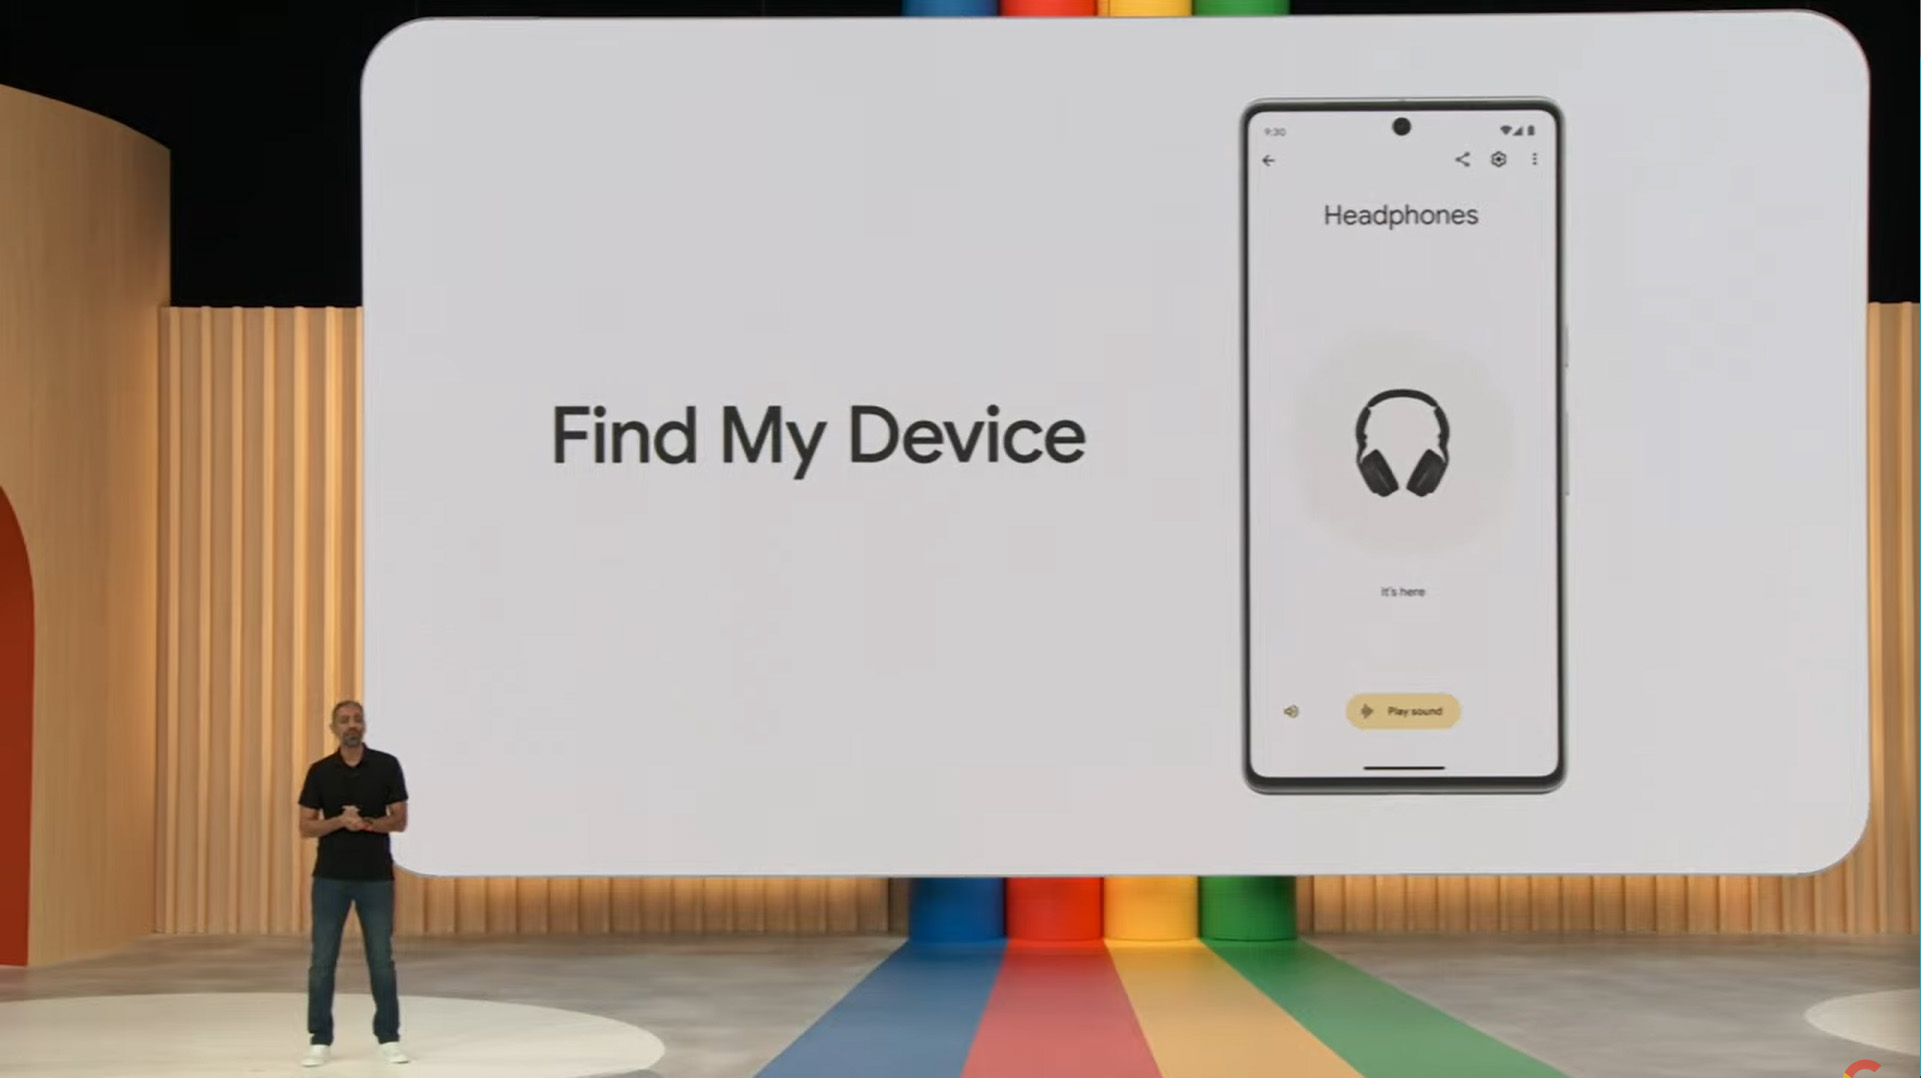 Google teases the launch of its Find My Device network for Android